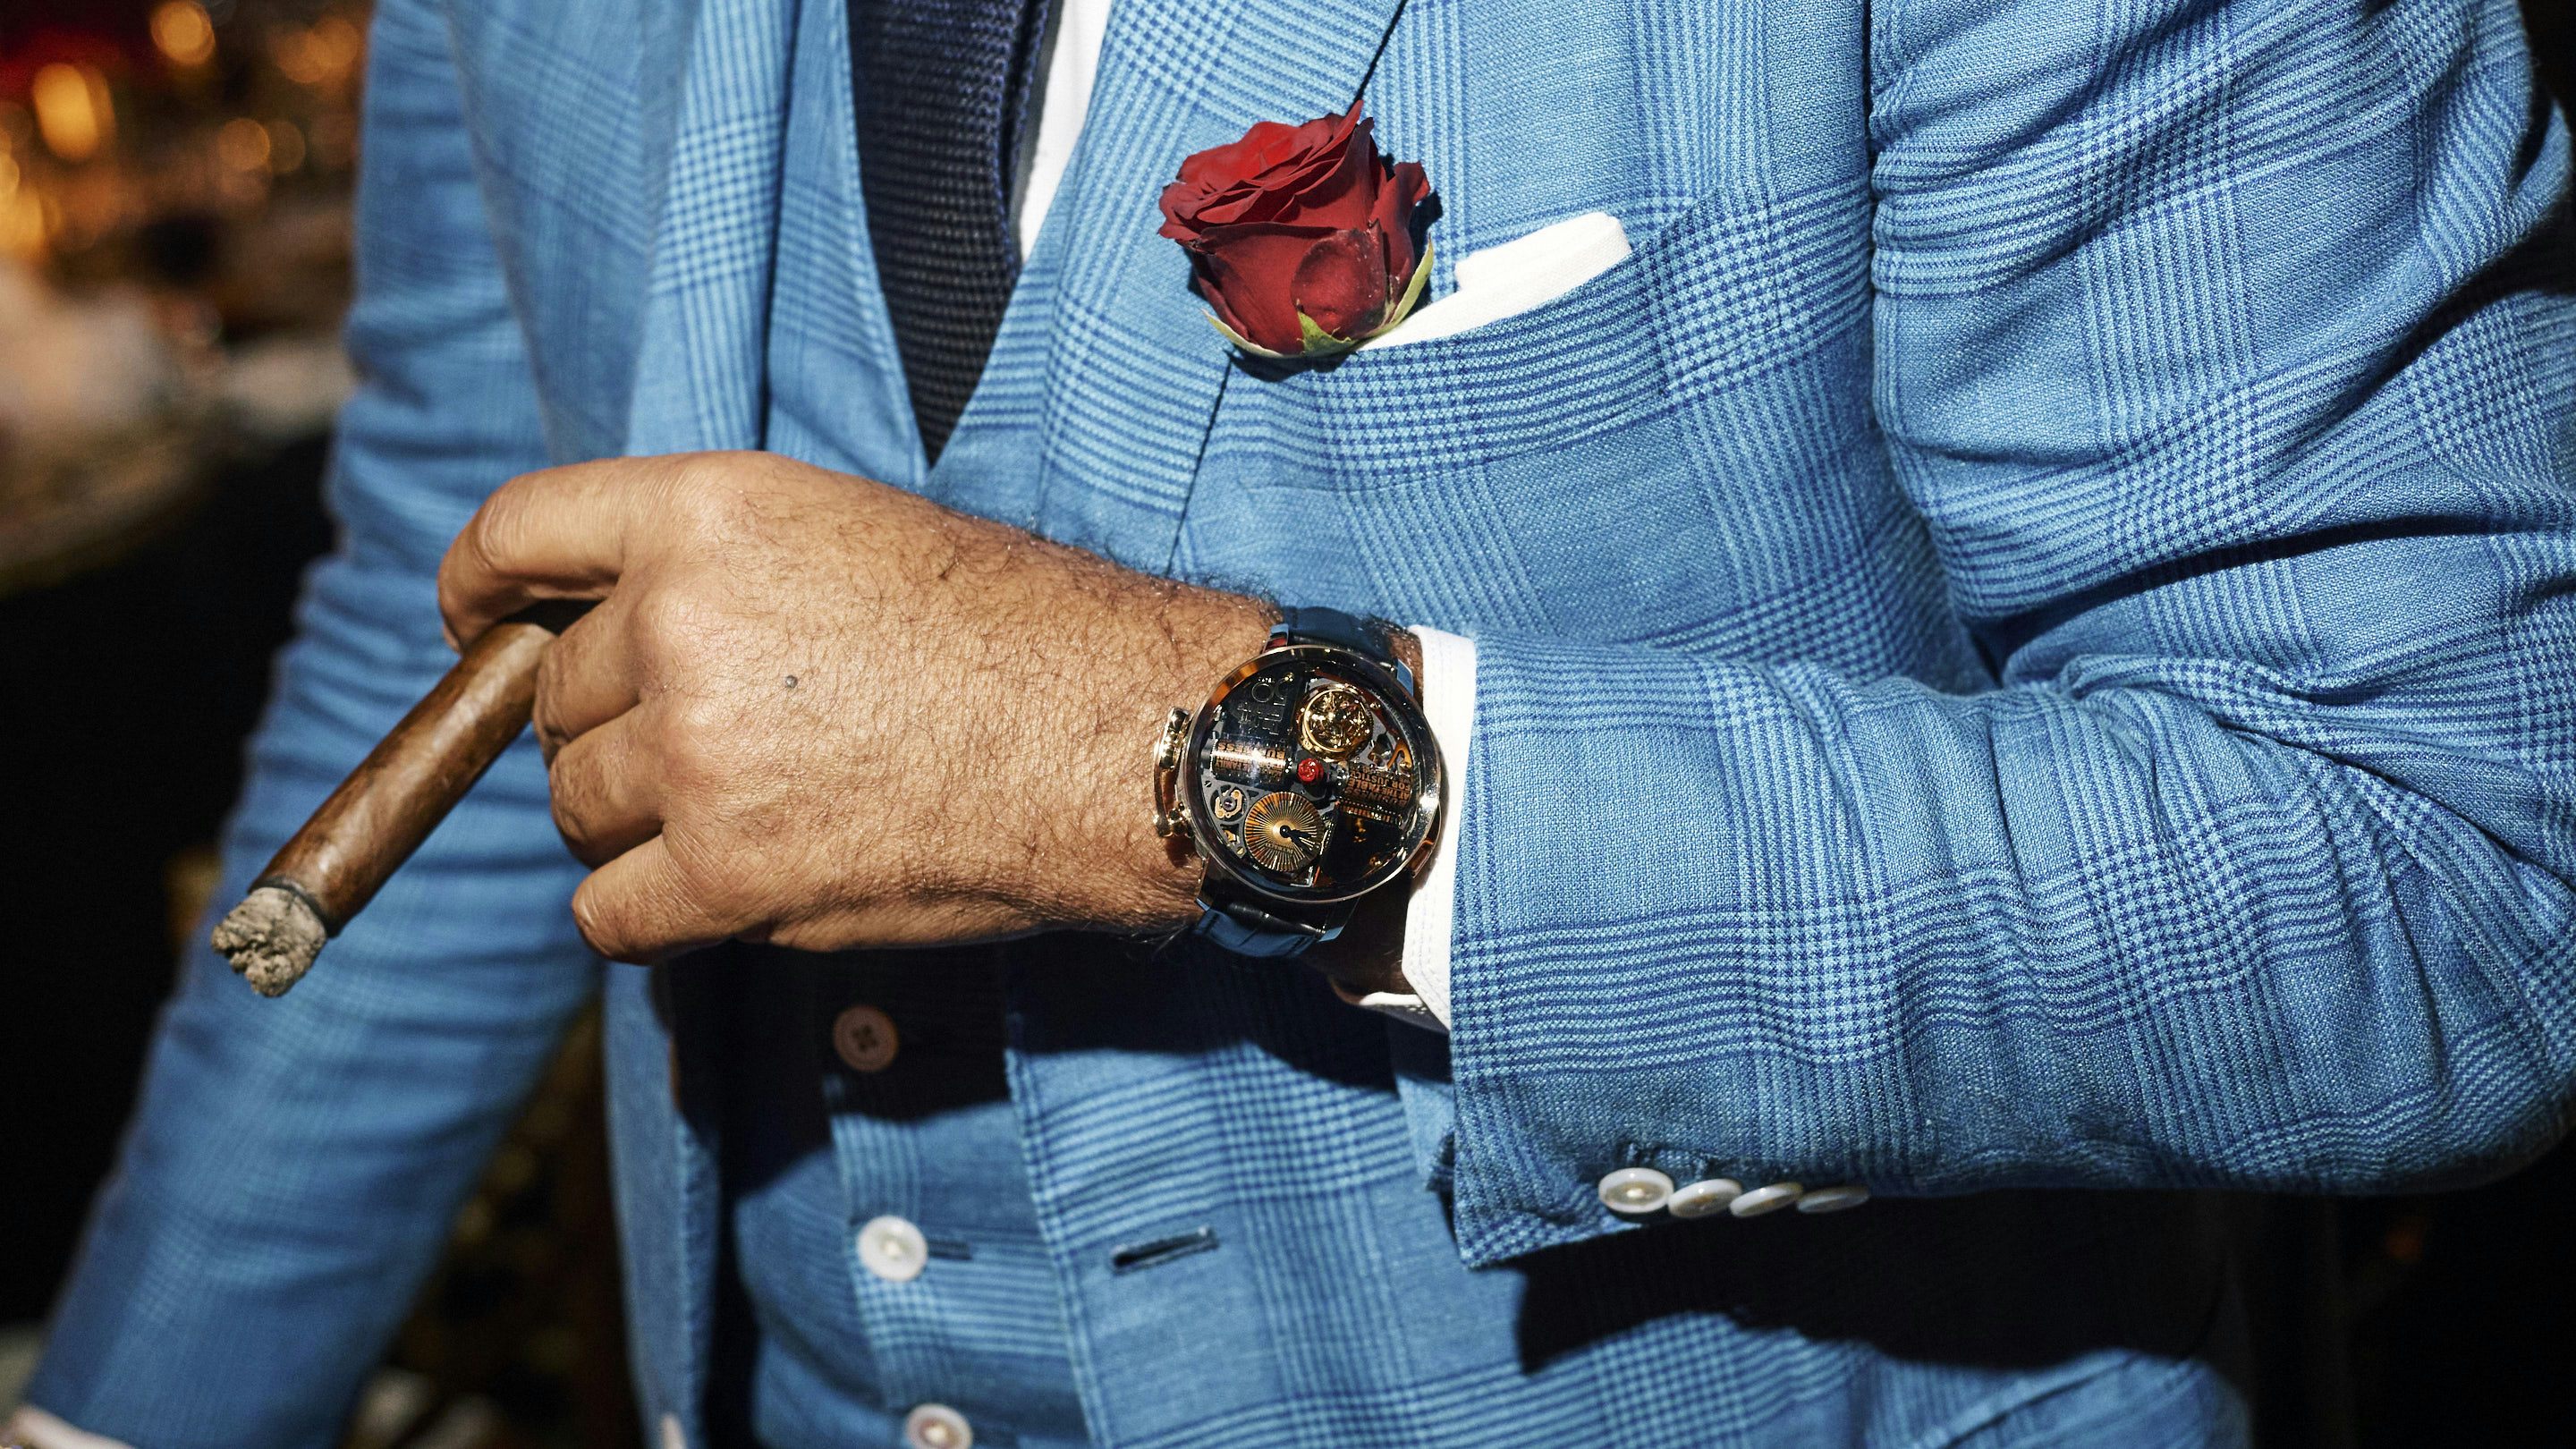 Jacob & Co.'s New Godfather Watch Released In Sicily